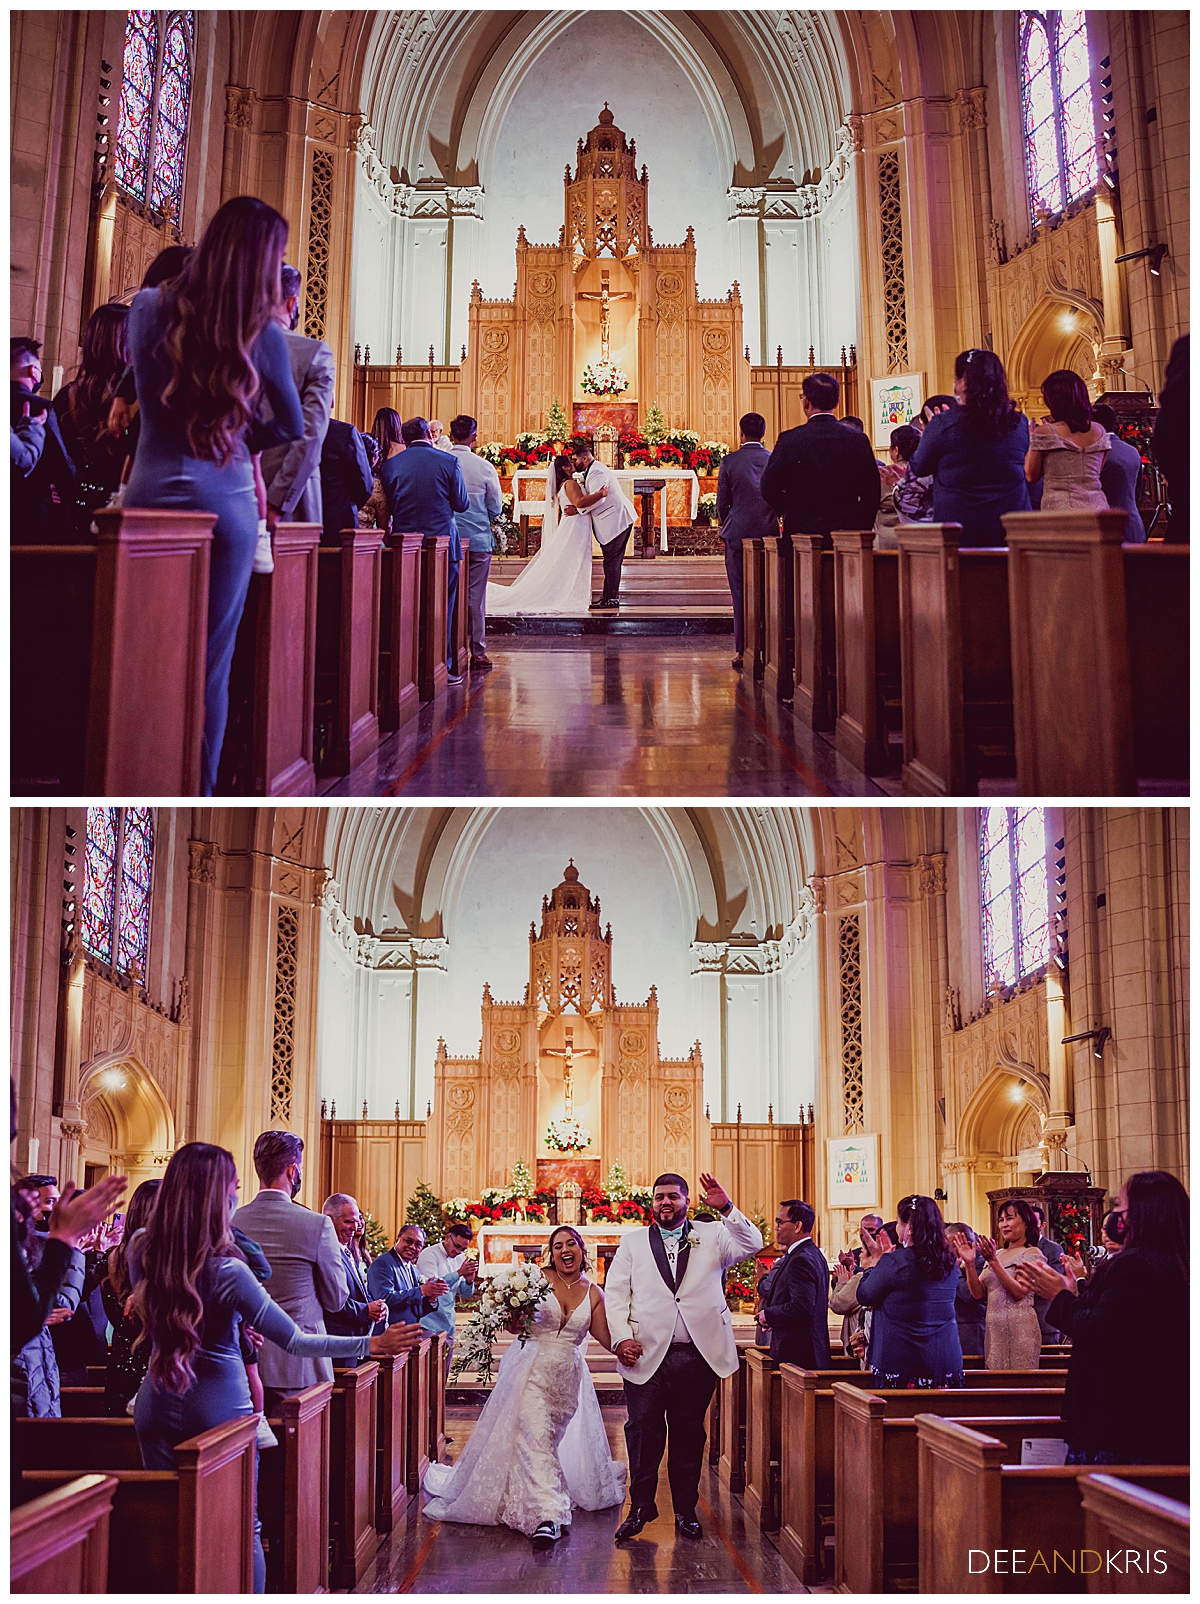 Two images: Top image of first married kiss at front of altar at The Cathedral of the Annunciation. Bottom image of recessional with couple celebrating.